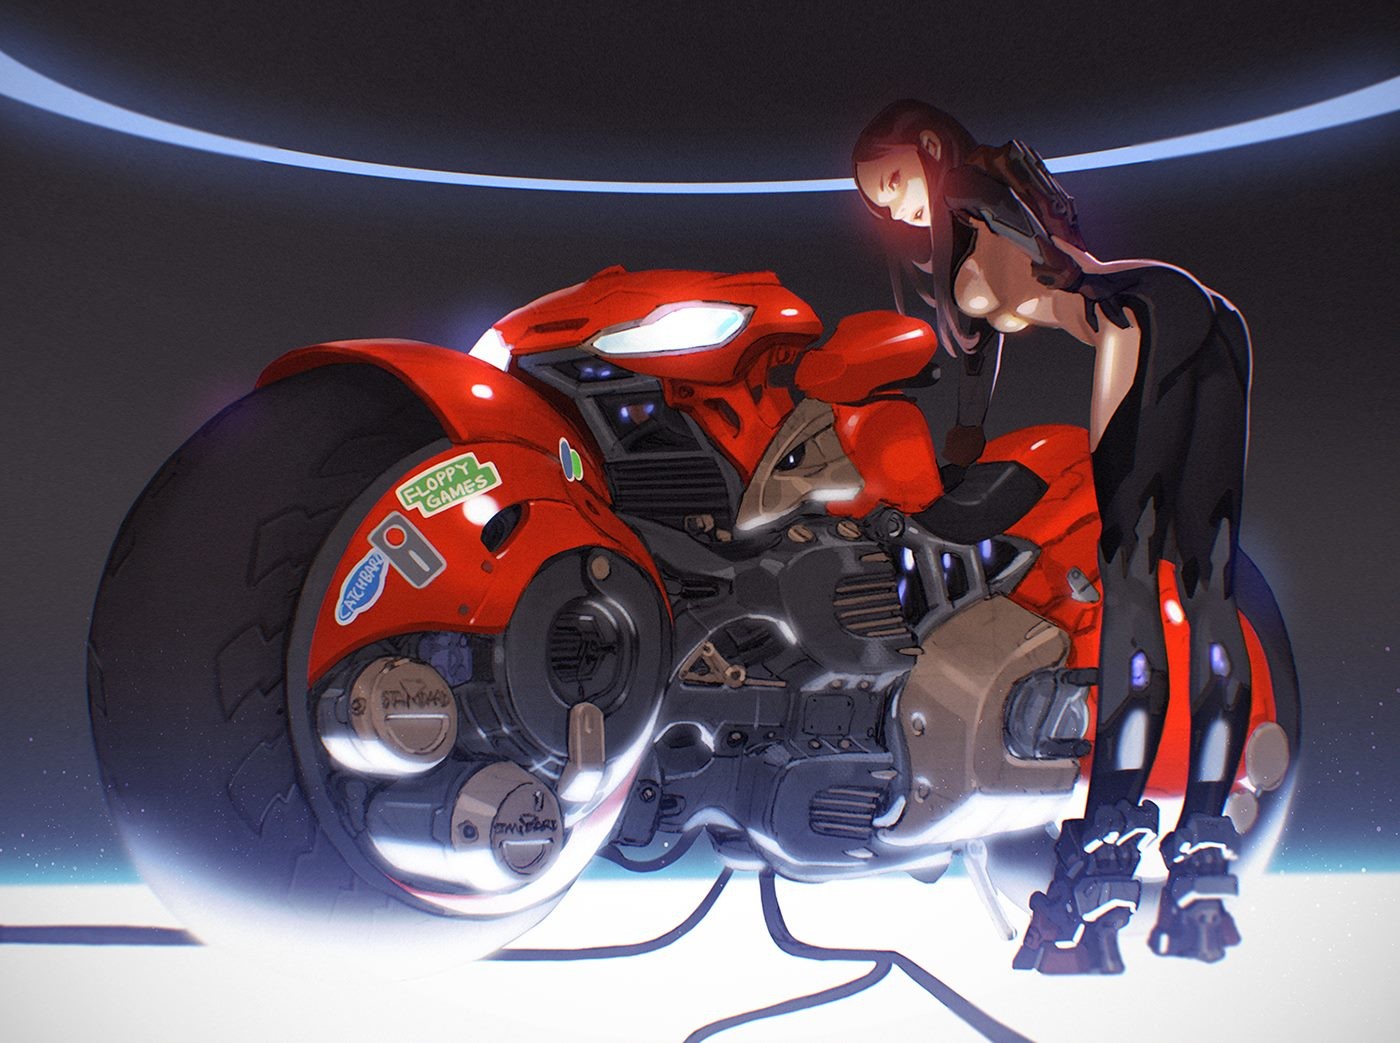 Red Motorbike by Sunkist Lee Sex Pics Hd